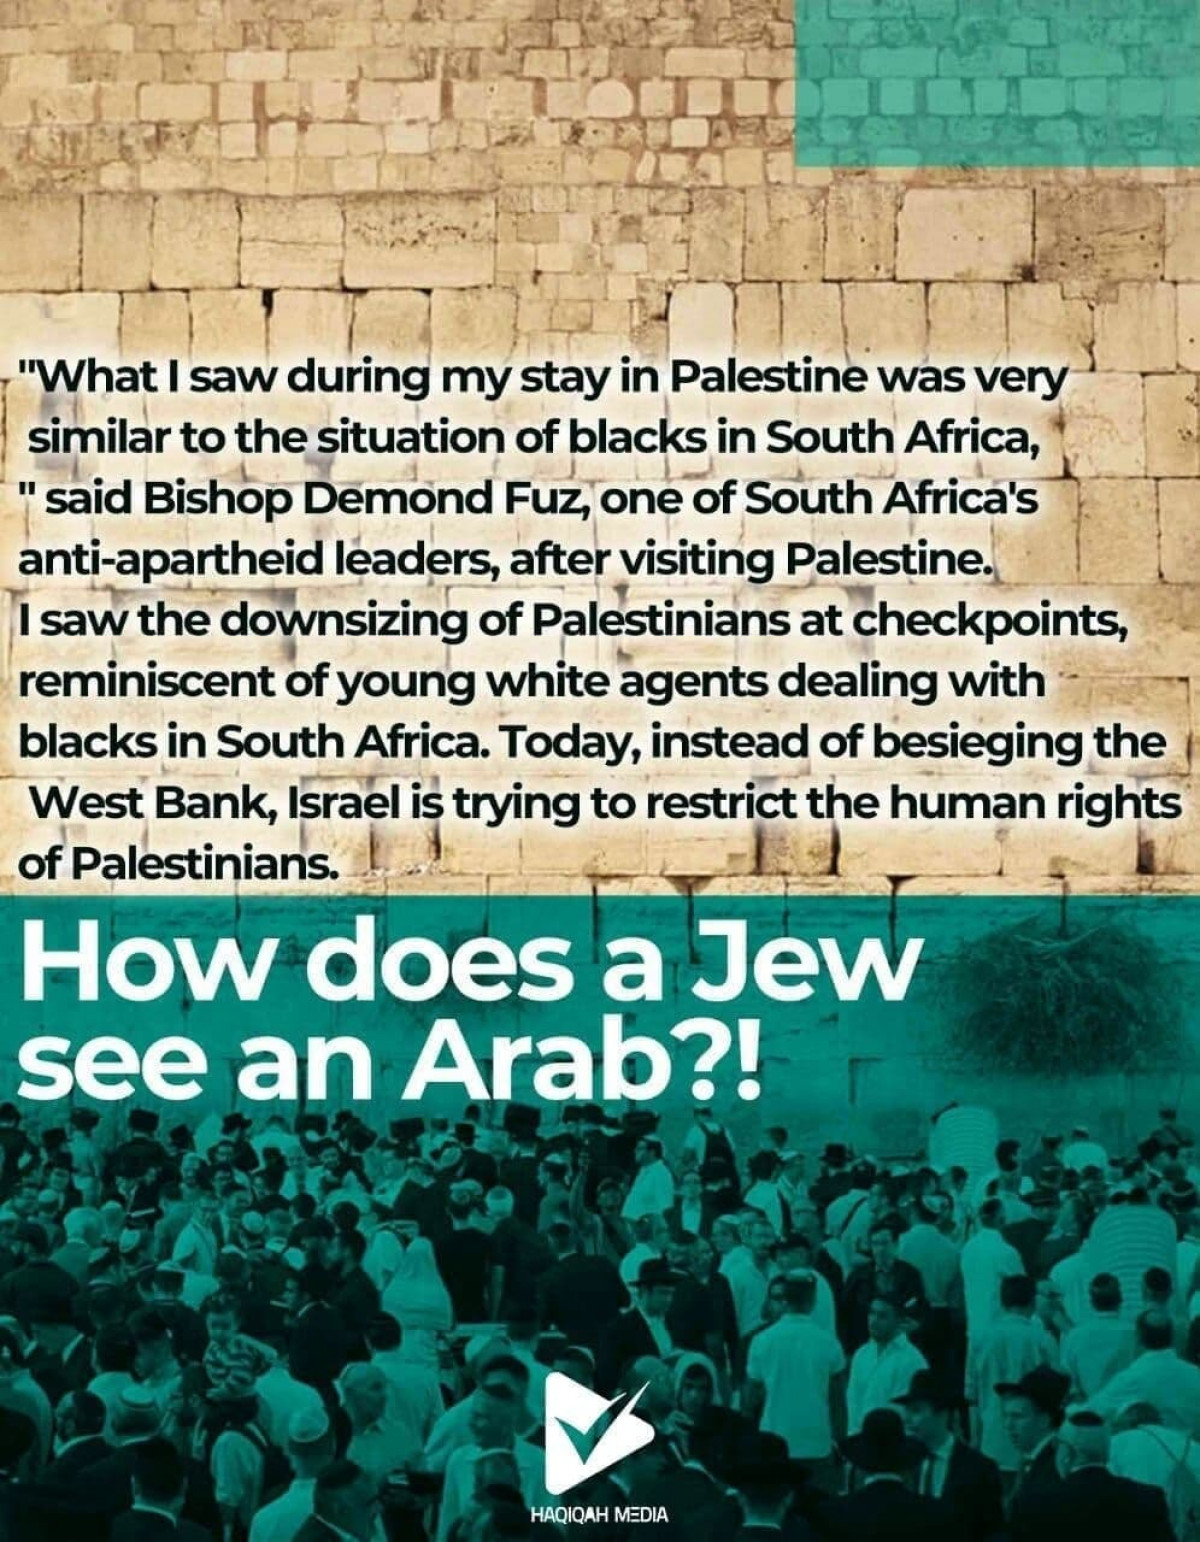 What l saw during my stay in Palestine was very similar to the situation of blacks in South Africa